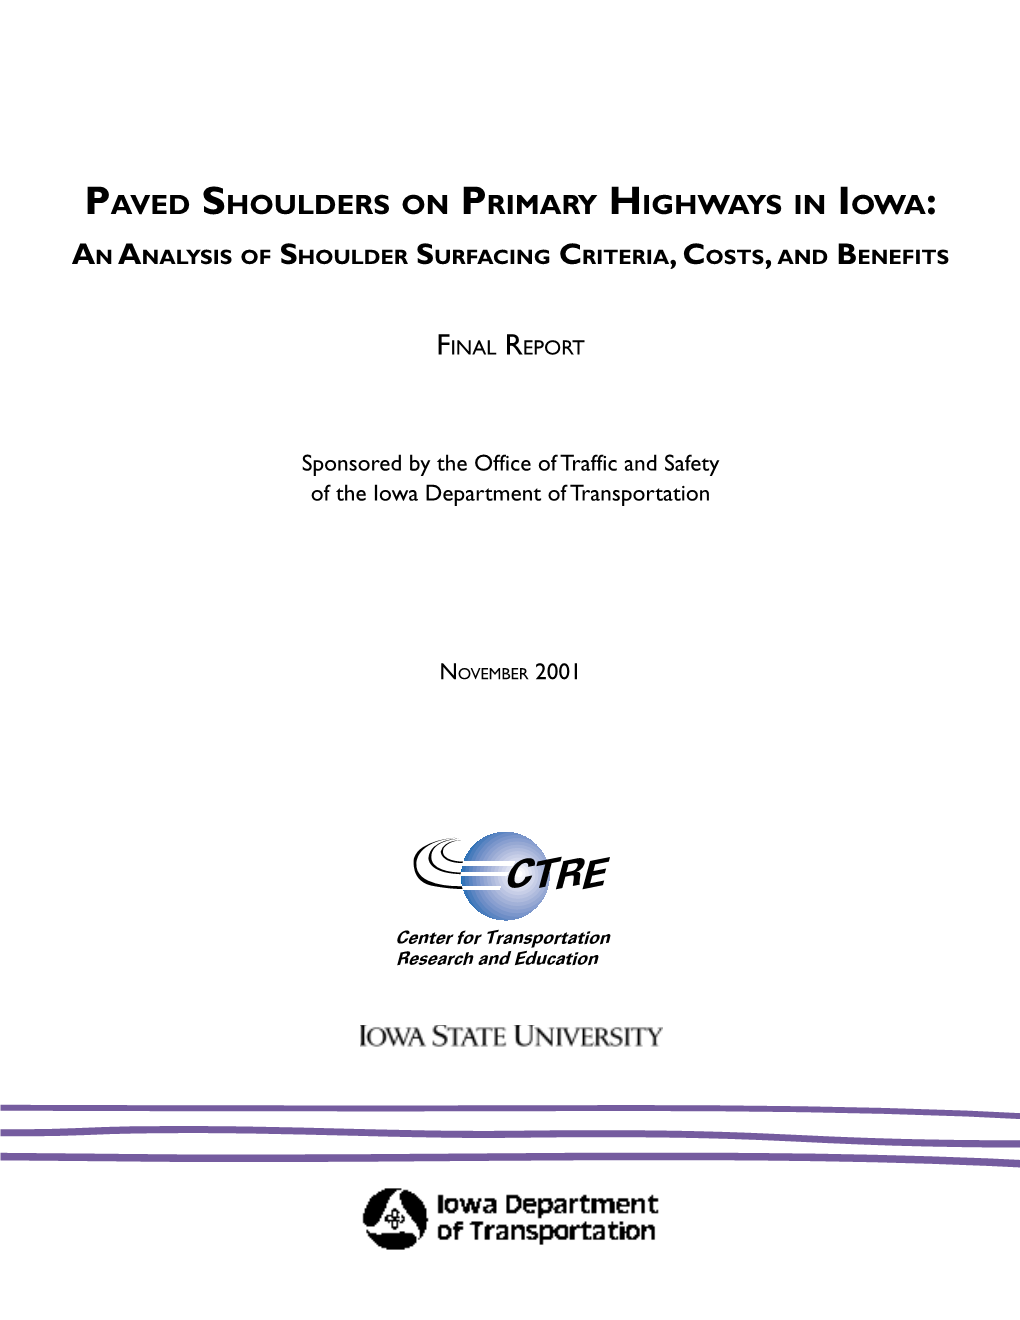 Paved Shoulders on Primary Highways in Iowa